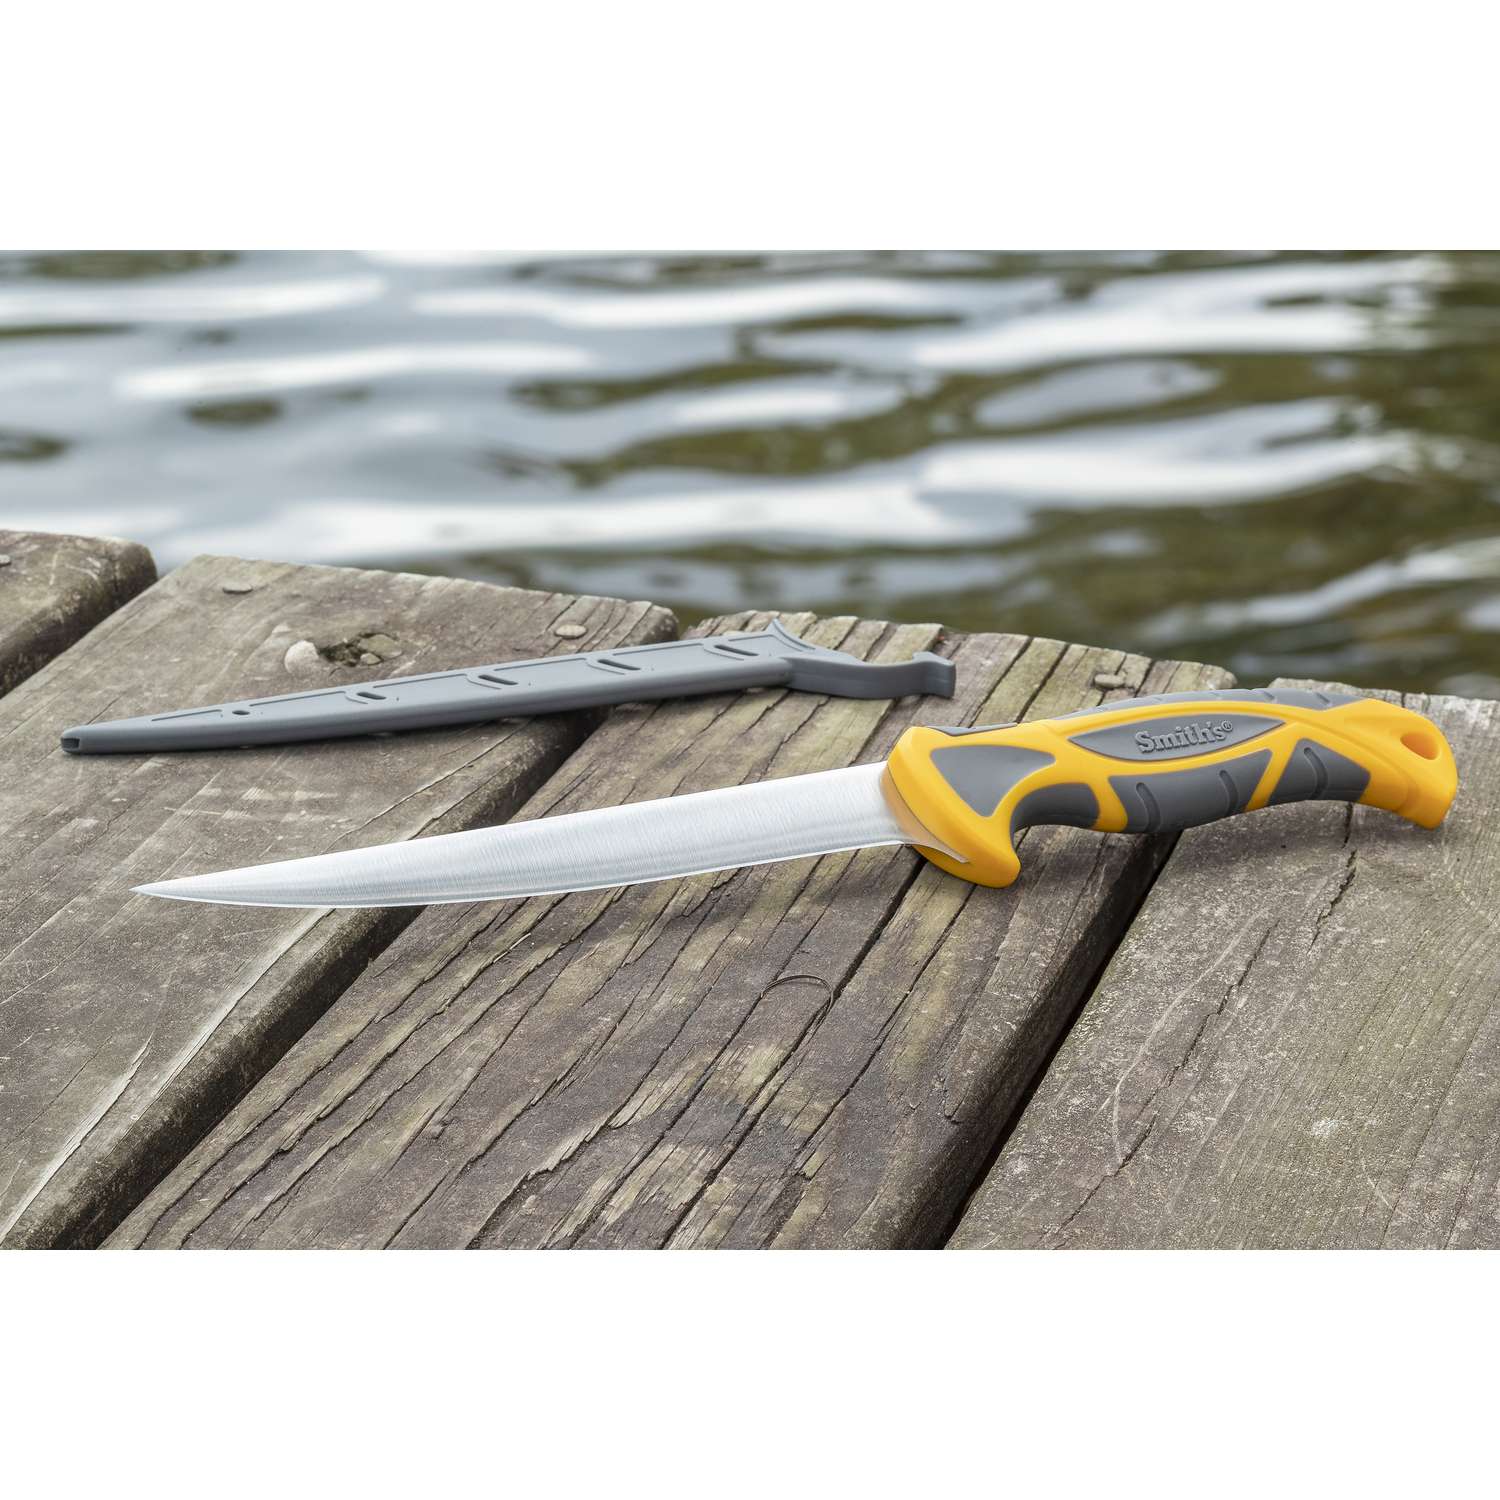 Fillet Fishing Knife, Personalized Knife, Fishing Gifts, BBQ Knife